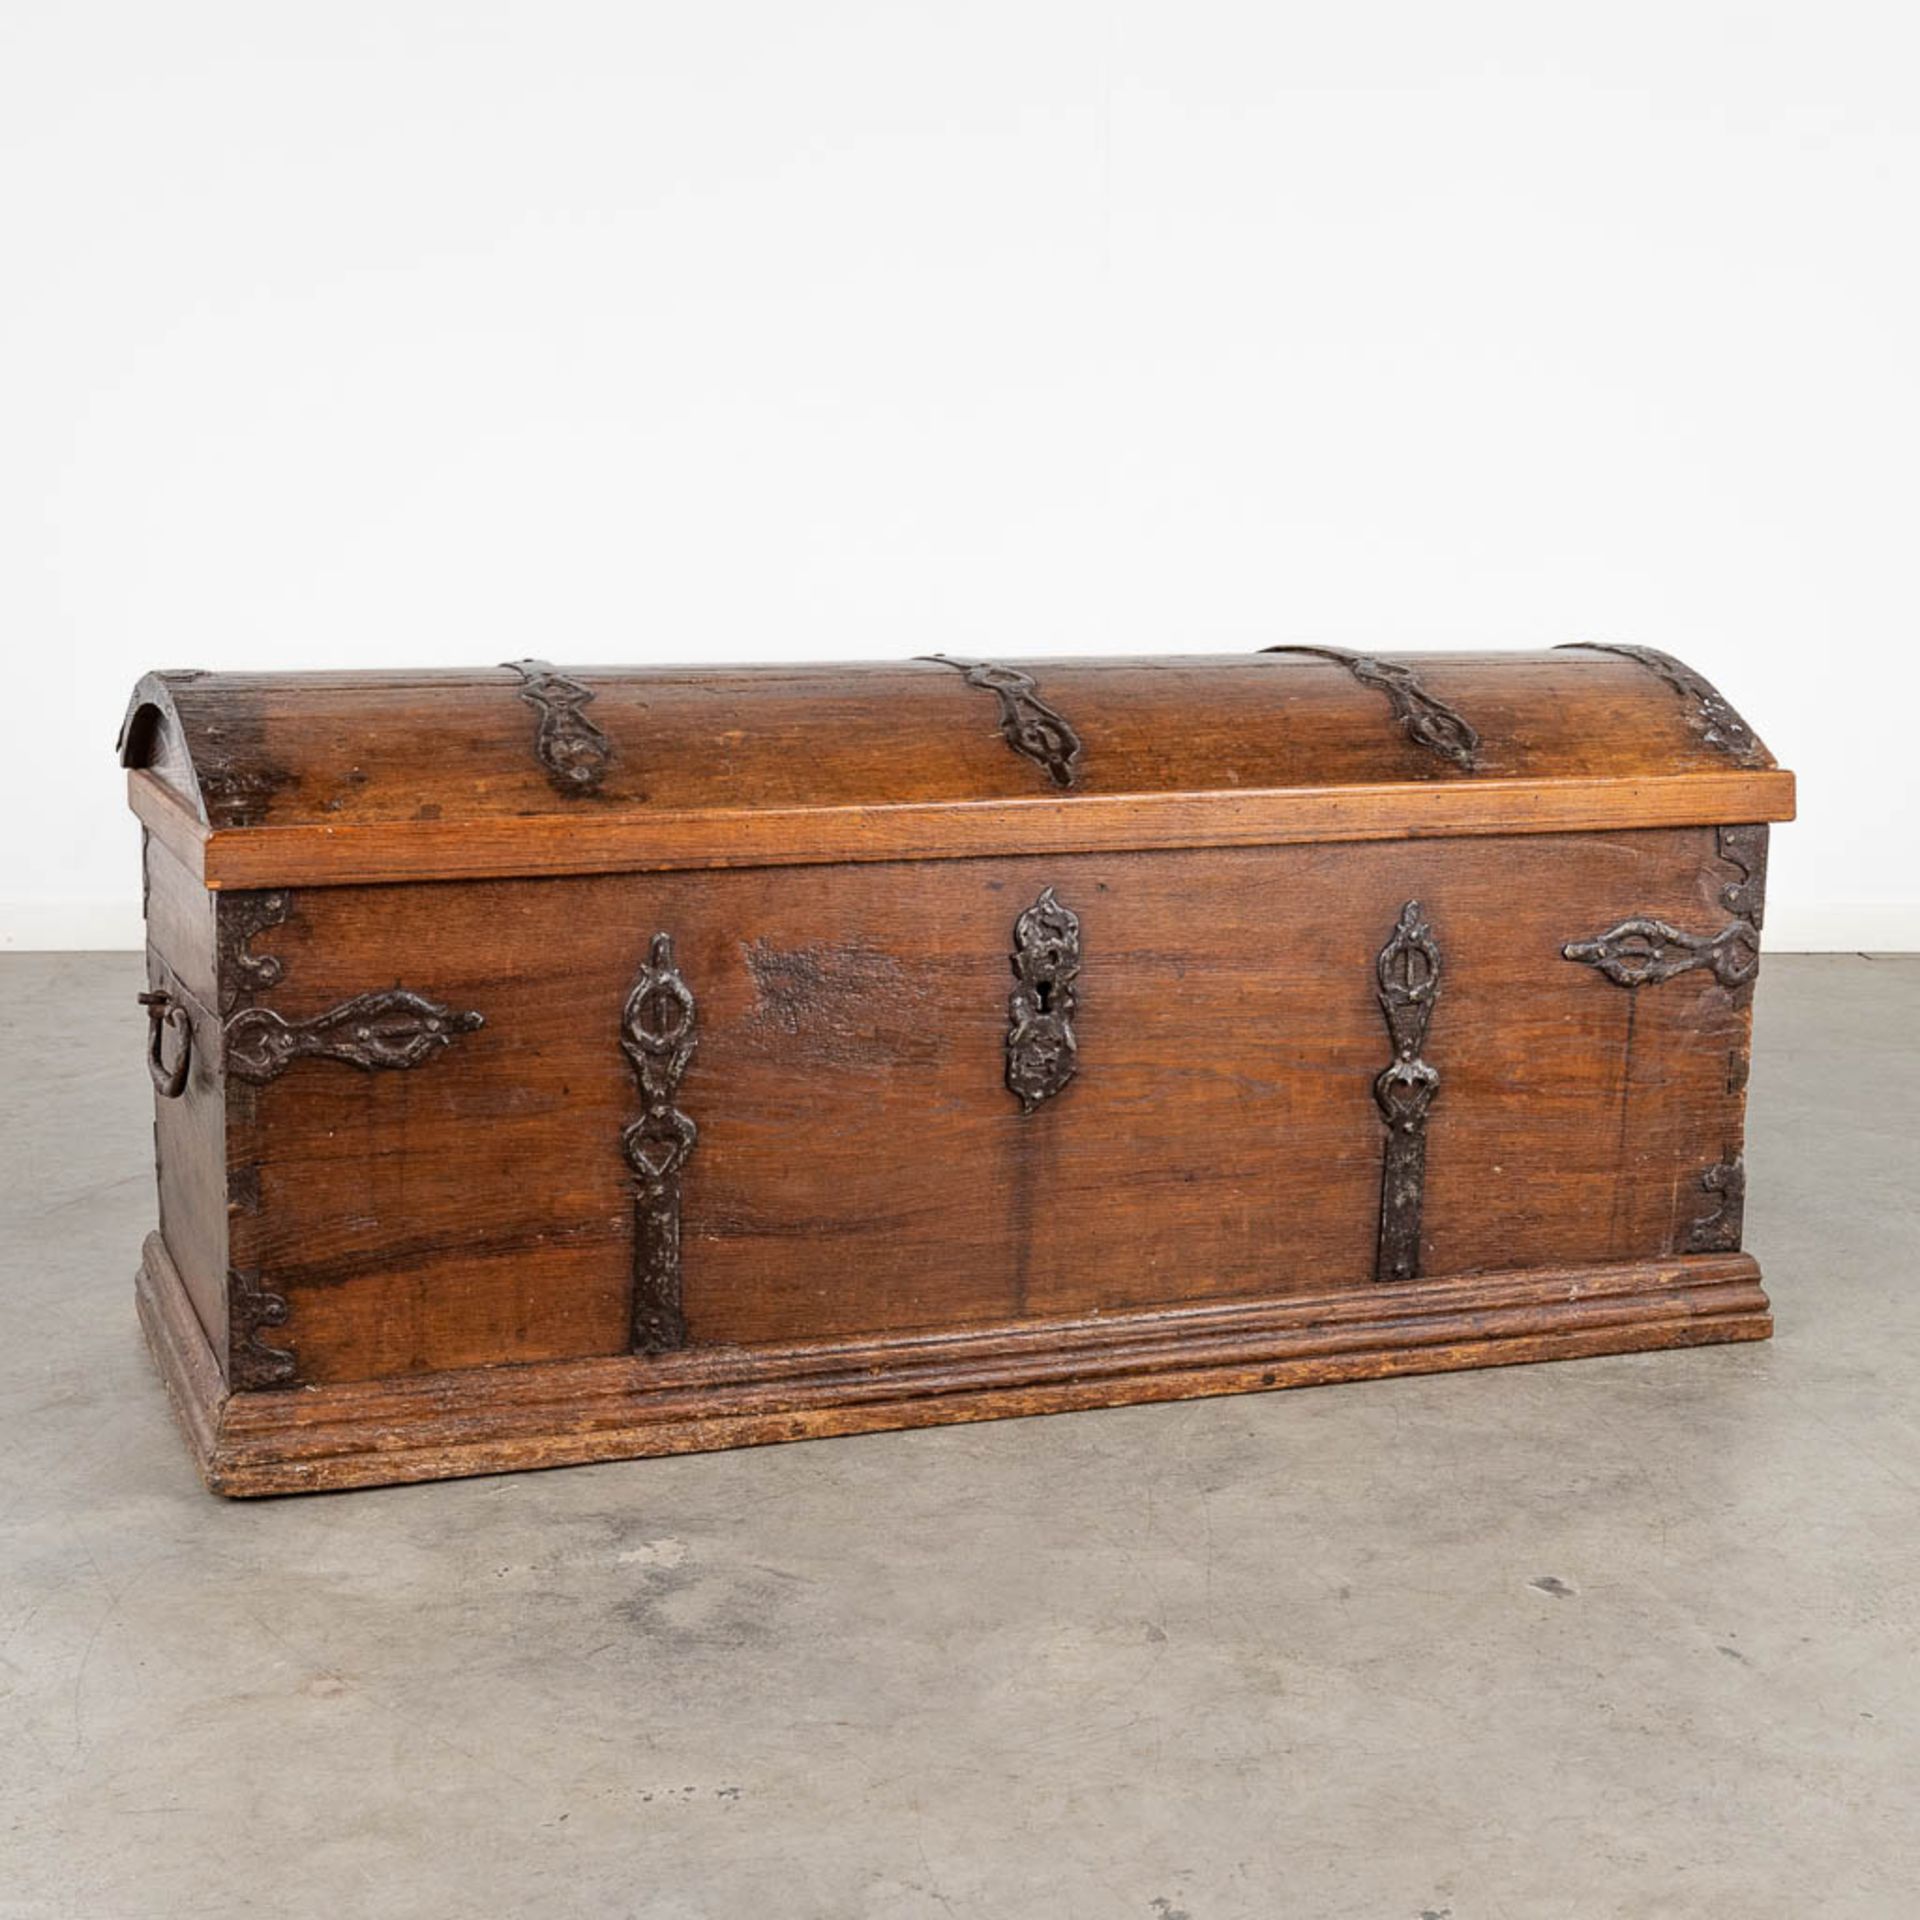 An antique chest, oak finished with wrought iron. 18th C. (L:58 x W:135 x H:58 cm)